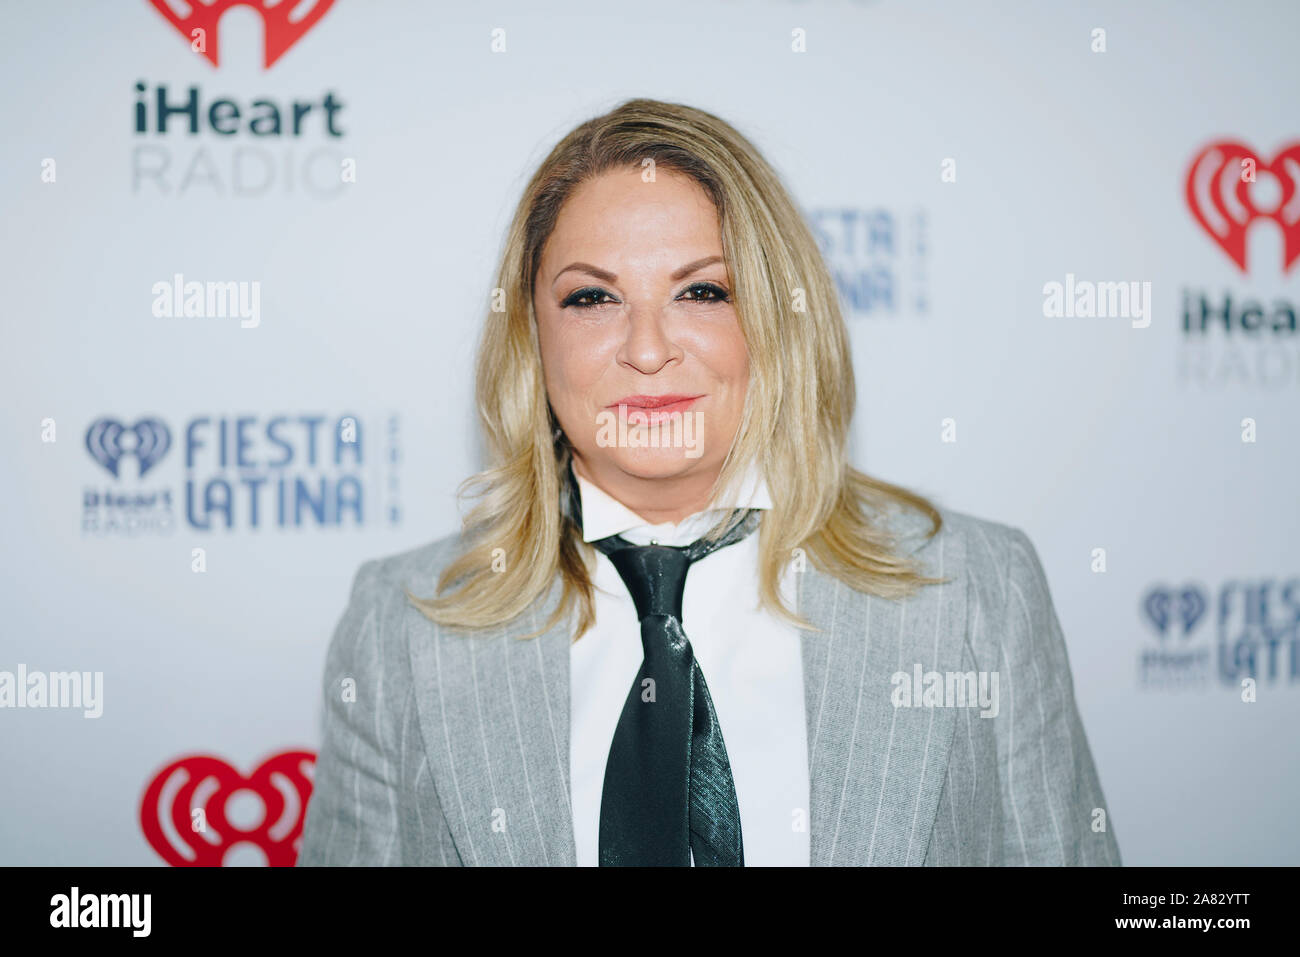 Ana Maria Polo on the red carpet at the iHeartRadio Fiesta Latina 2019 at the AmericanAirlines Arena in Miami, Florida on November 2 2019 Stock Photo